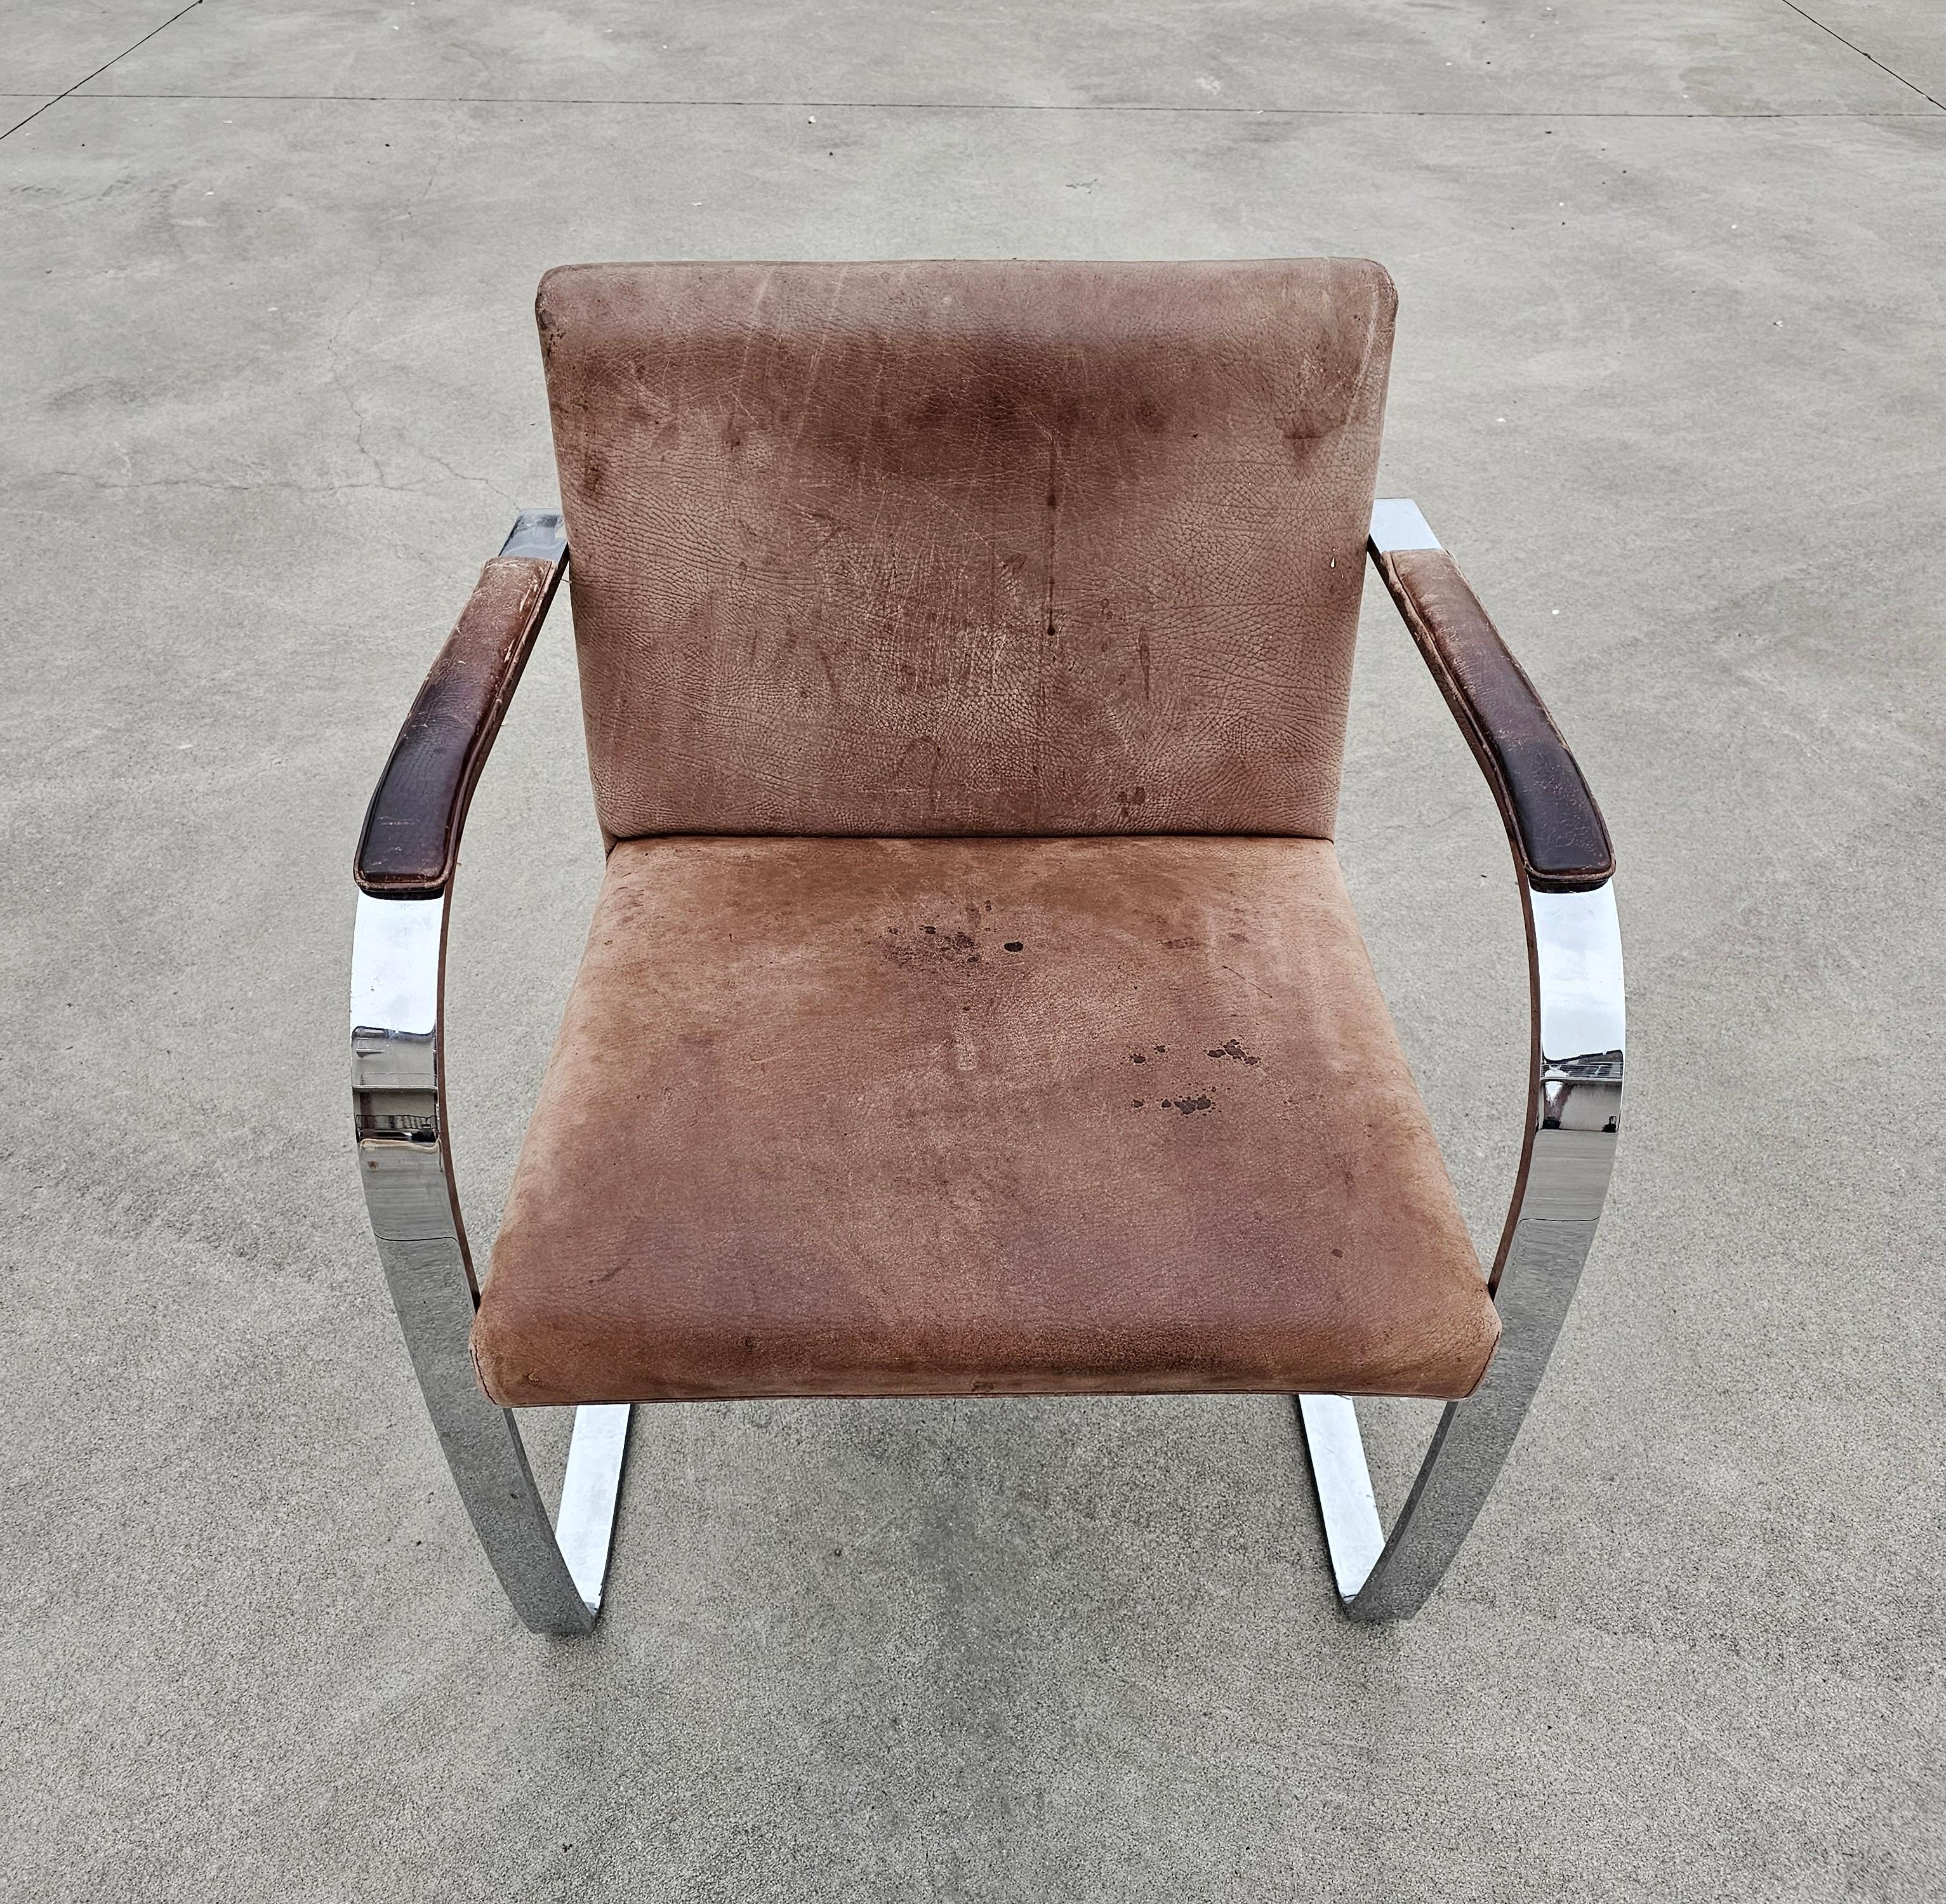 In this listing you will find a set of 4 iconic dining chairs designed by Ludwig Mies van der Rohe, in pale brown leather, model Brno Chair Flat Bar 255. They feature a very heavy frame done in chrome plated steel and soft brown leather.

ORIGIN: